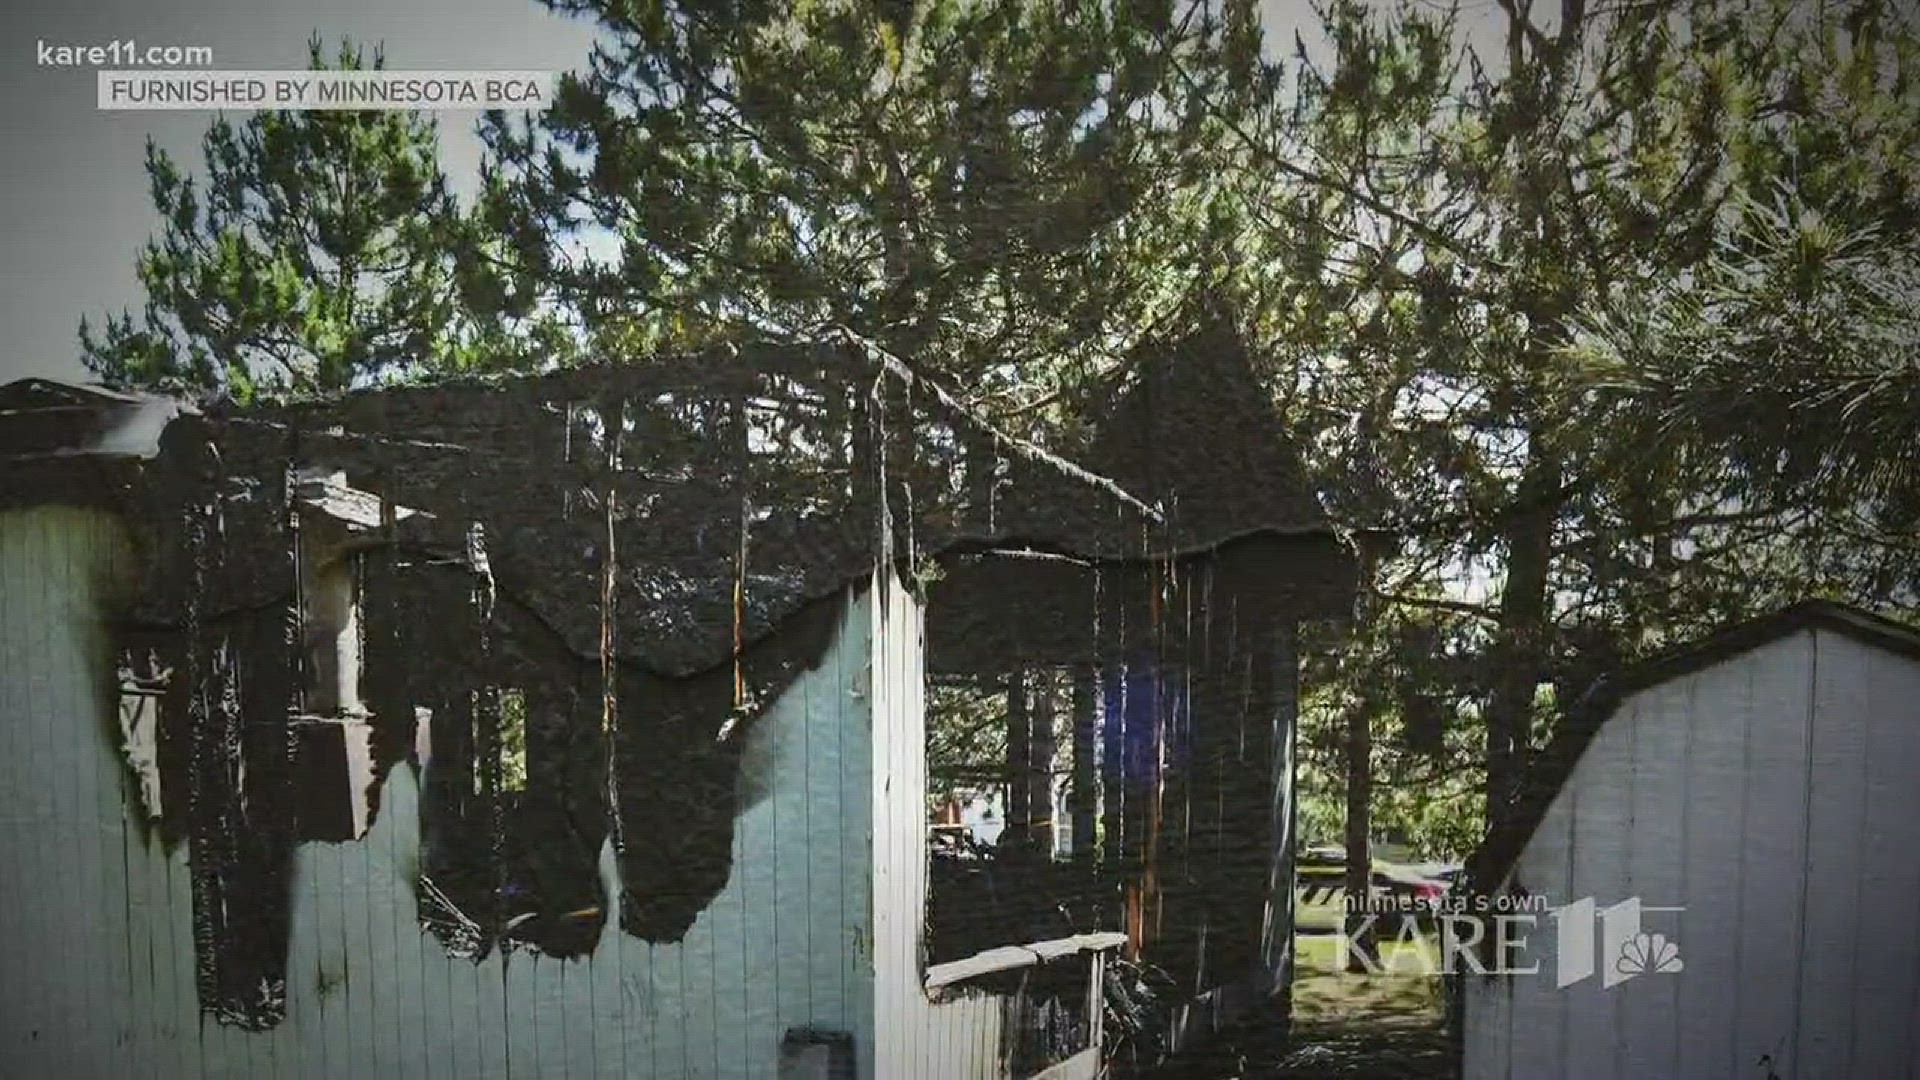 Authorities were investigating a fatal fire when they learned a 5-year-old child was last seen inside the burned trailer ... suddenly, they were up against the clock to make this a rescue mission, and not a recovery. http://kare11.tv/2GXQcBx